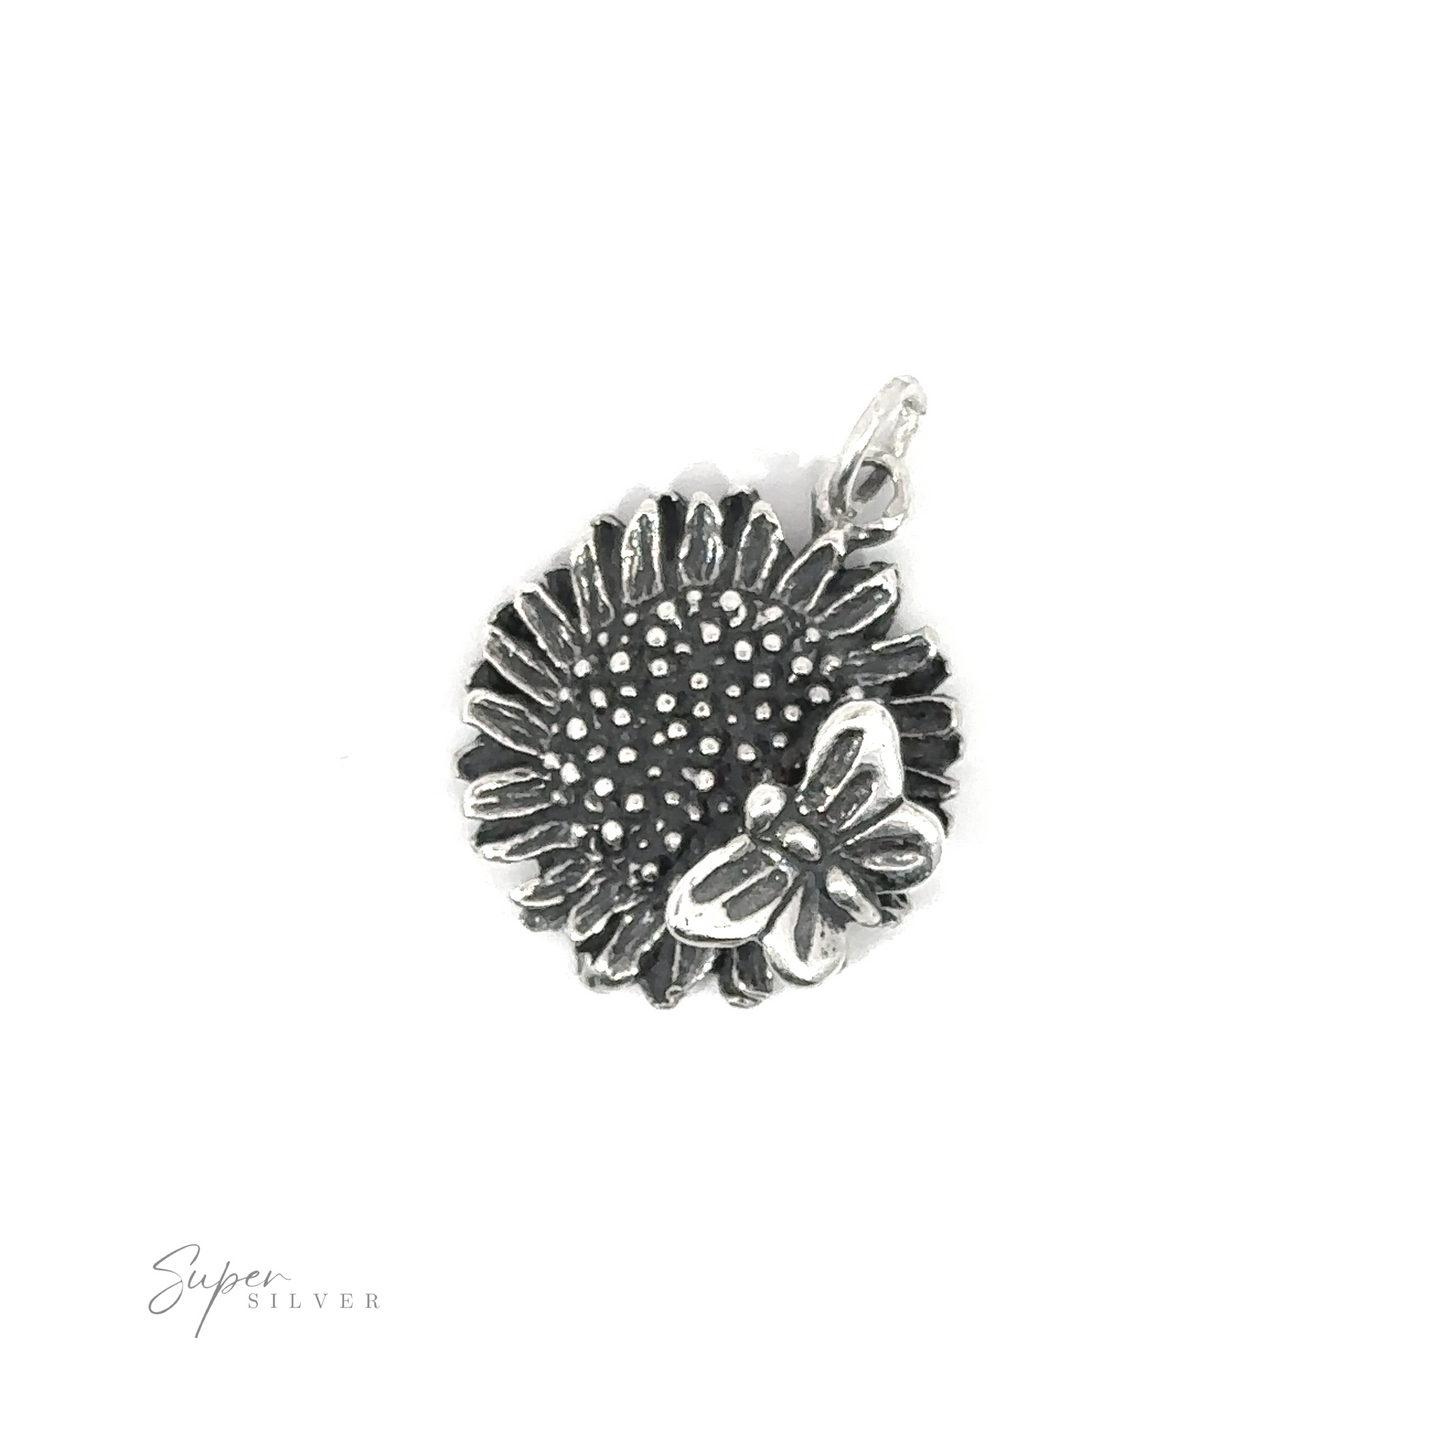 Sunflower charm with butterfly pendant with textured details on a white background.